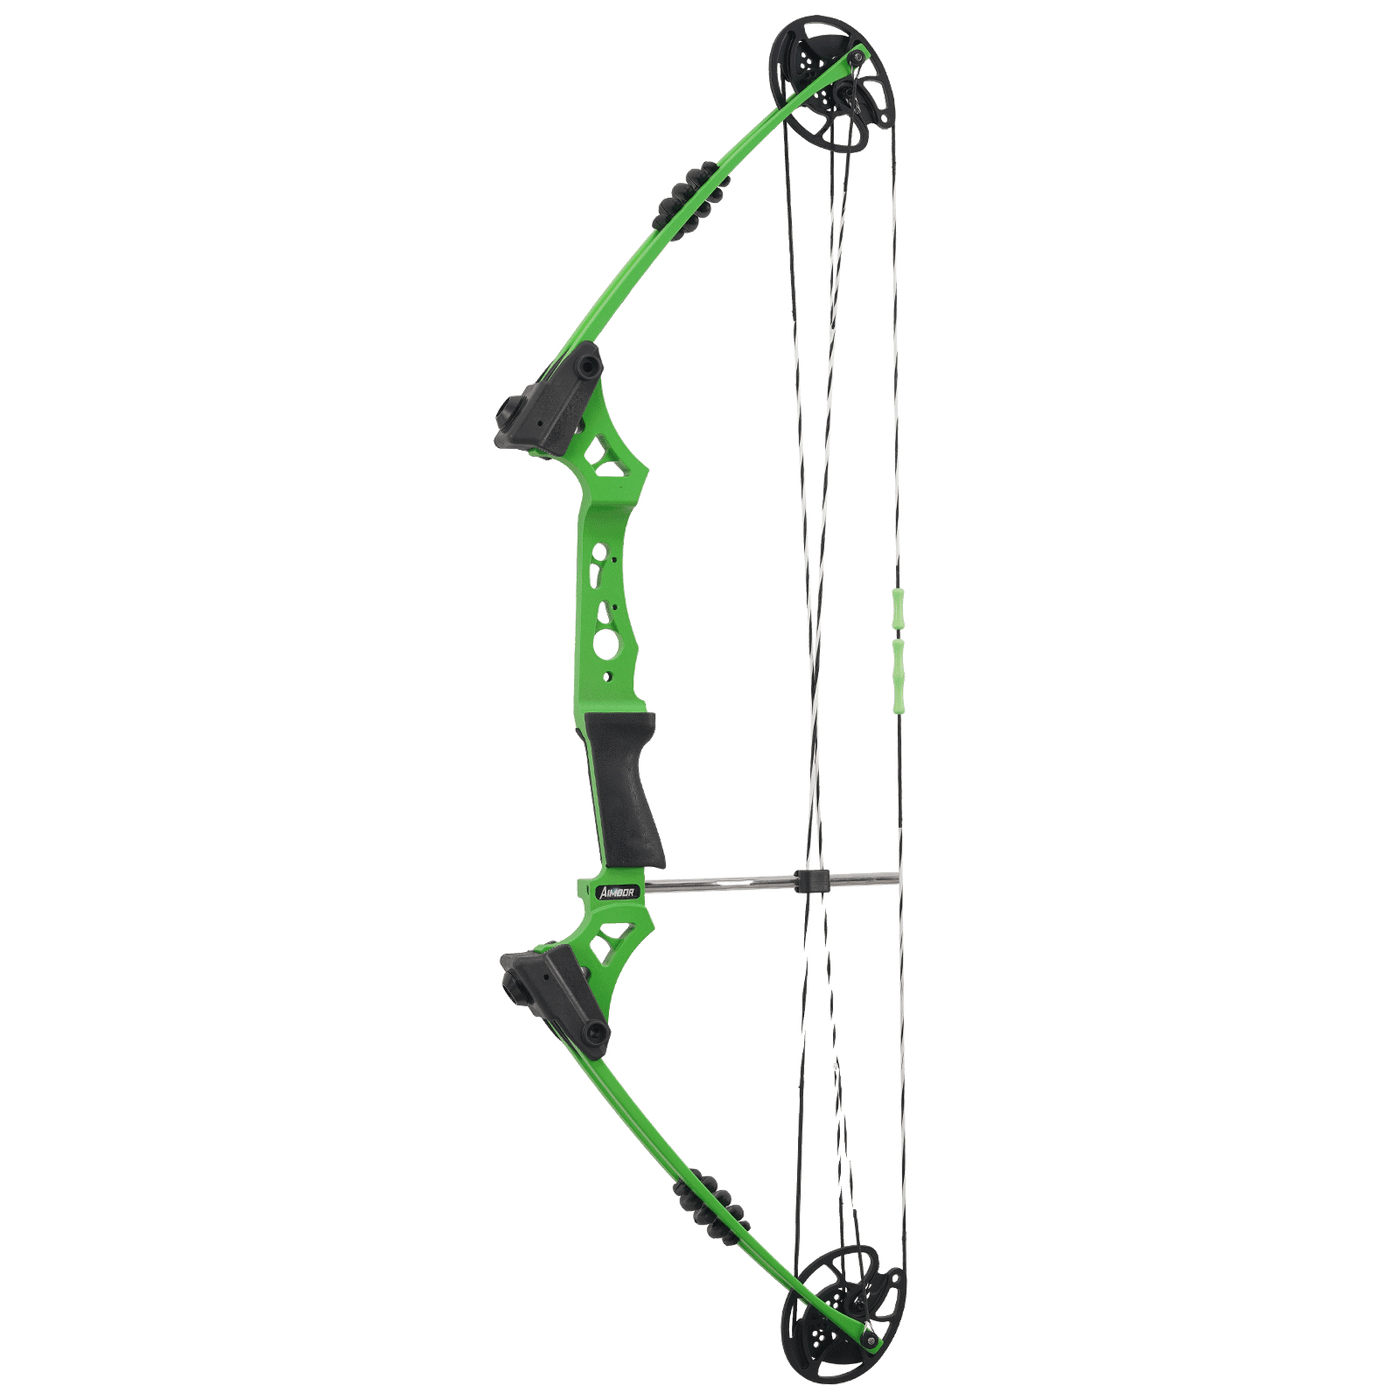 M009 Green Archery Compound Bow&Arrow Set, For Youth&Adults, Ages 16+